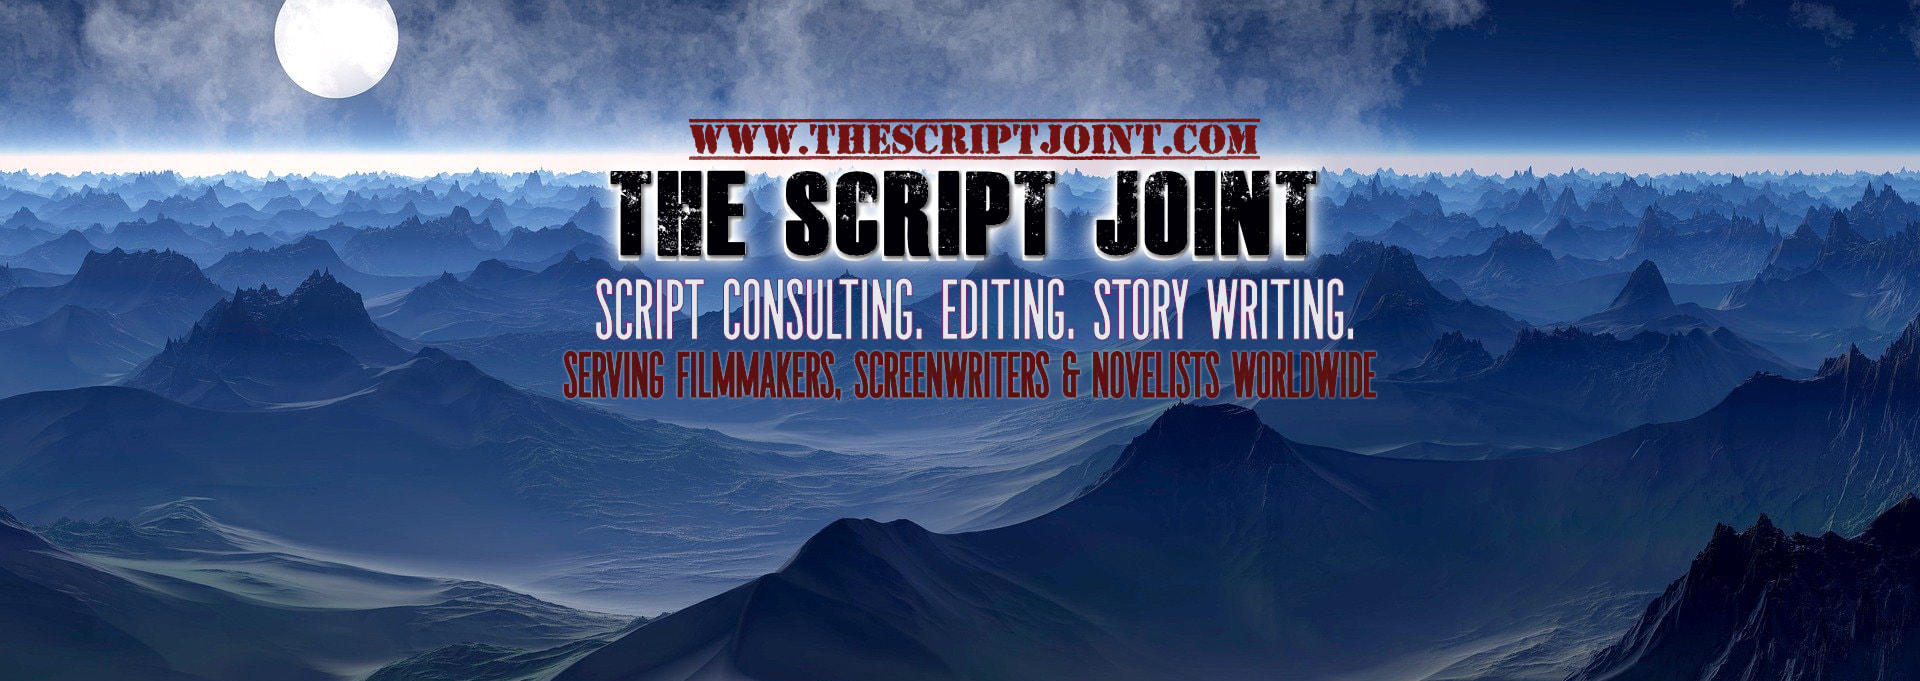 Screenplay Editing service at www.TheScriptJoint.com